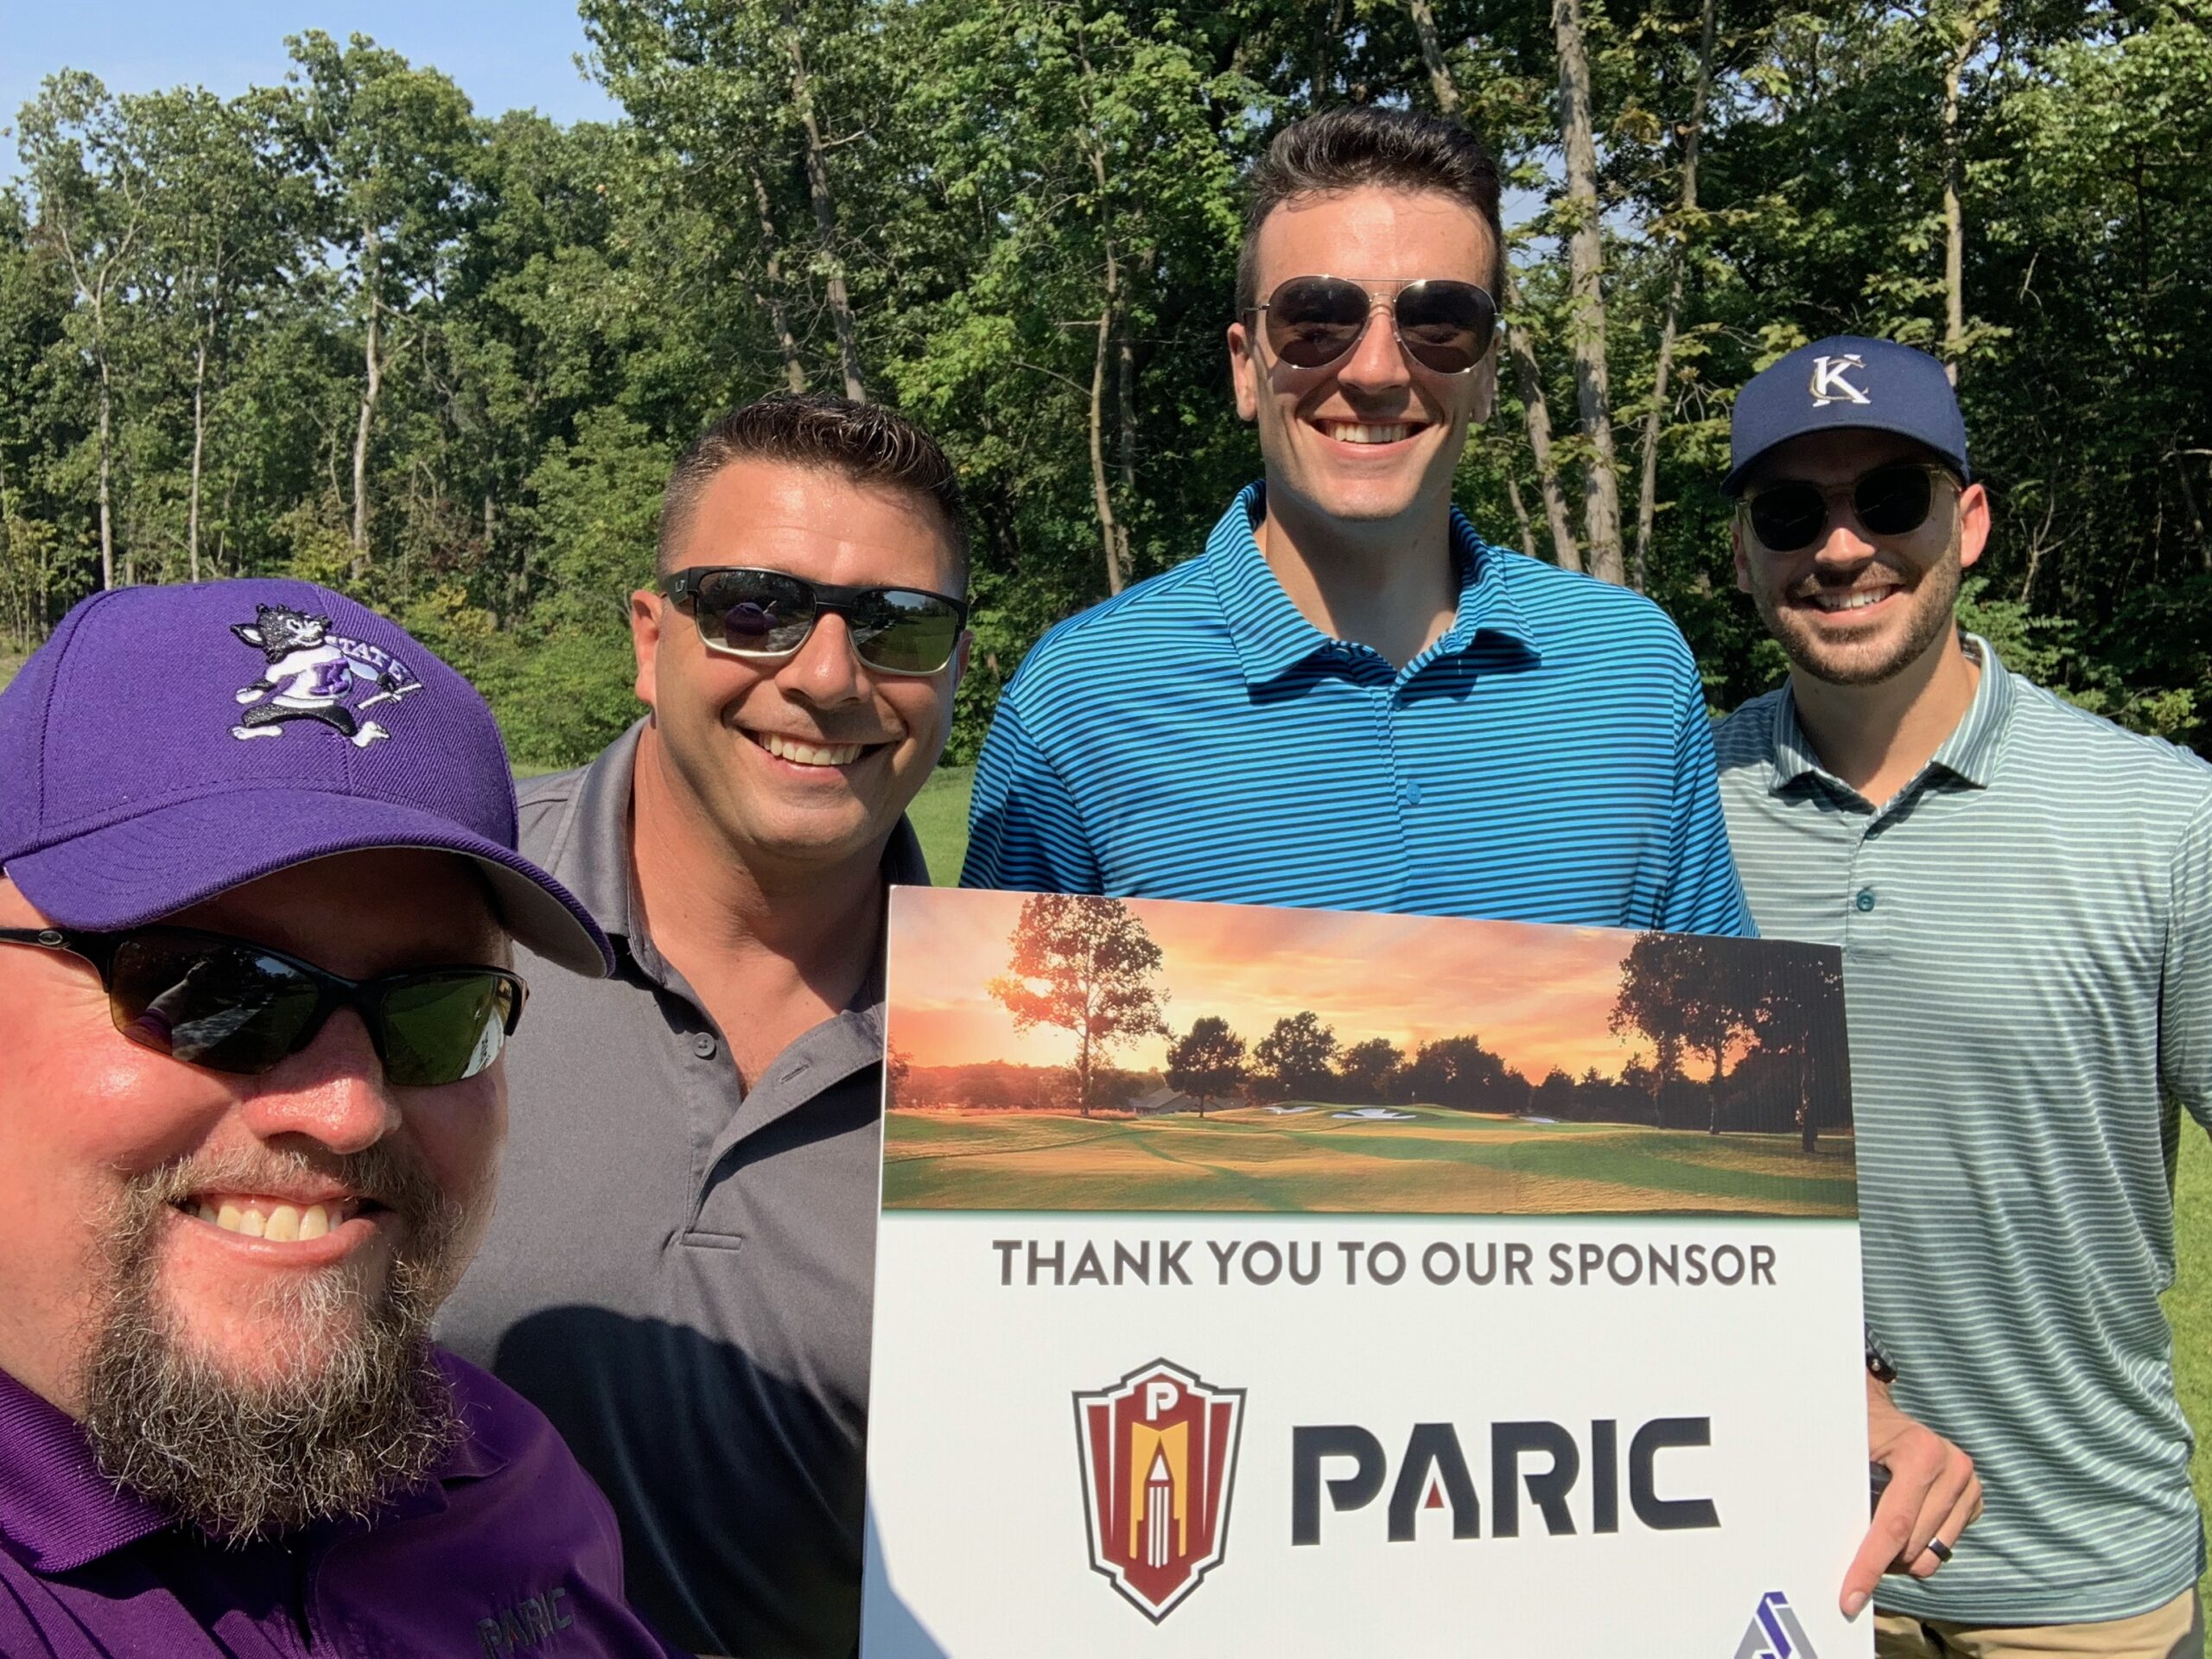 At PARIC, not only do we work together, we play together. Because sometimes the best way to get to know one another is outside of the office or the project.